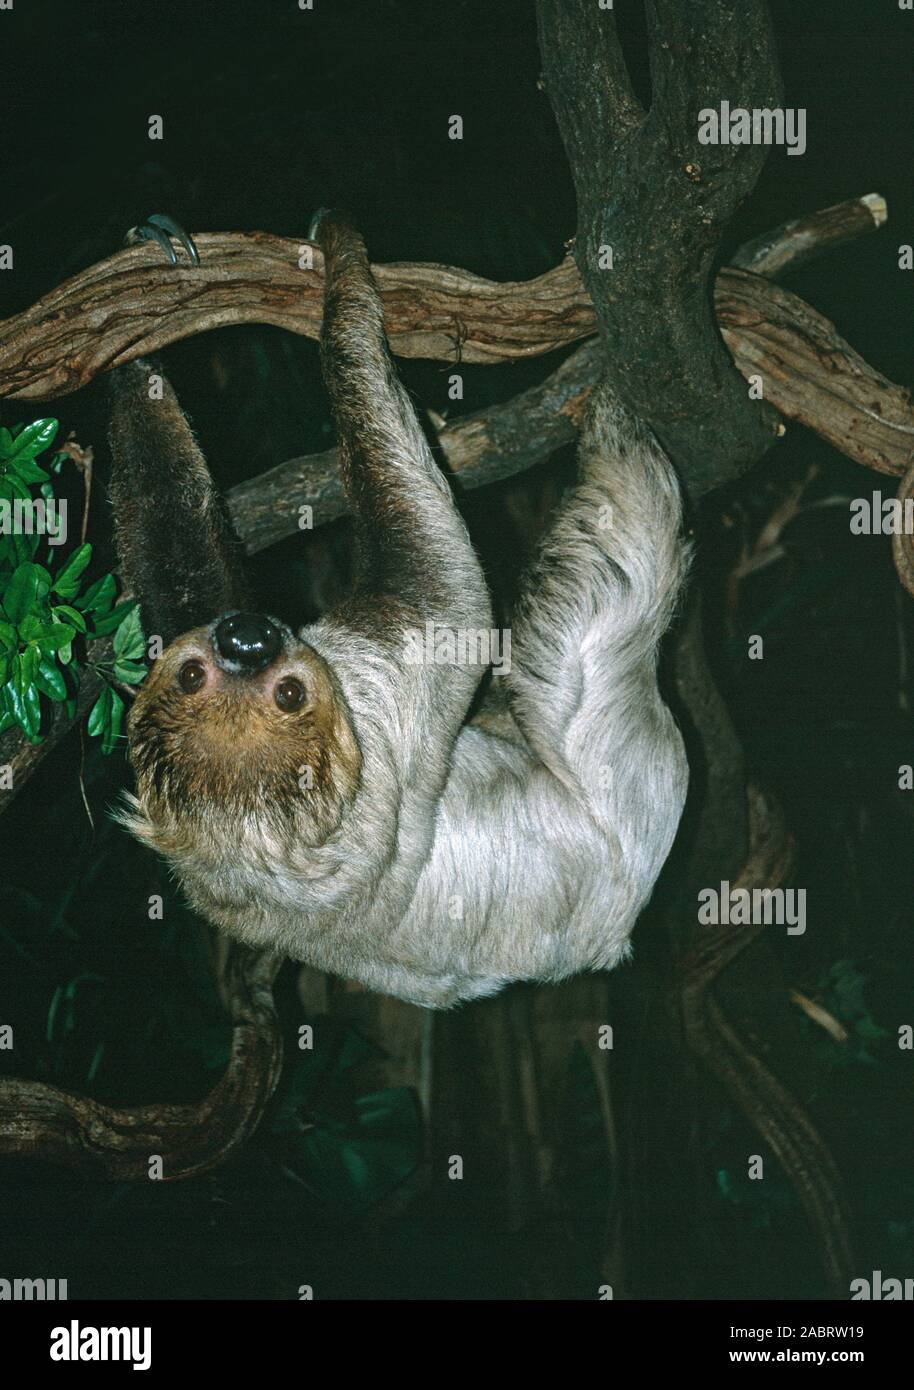 TWO-TOED SLOTH (Choloepus didactylus).  South American rainforest species. Emmen Zoo, The Netherlands. Stock Photo